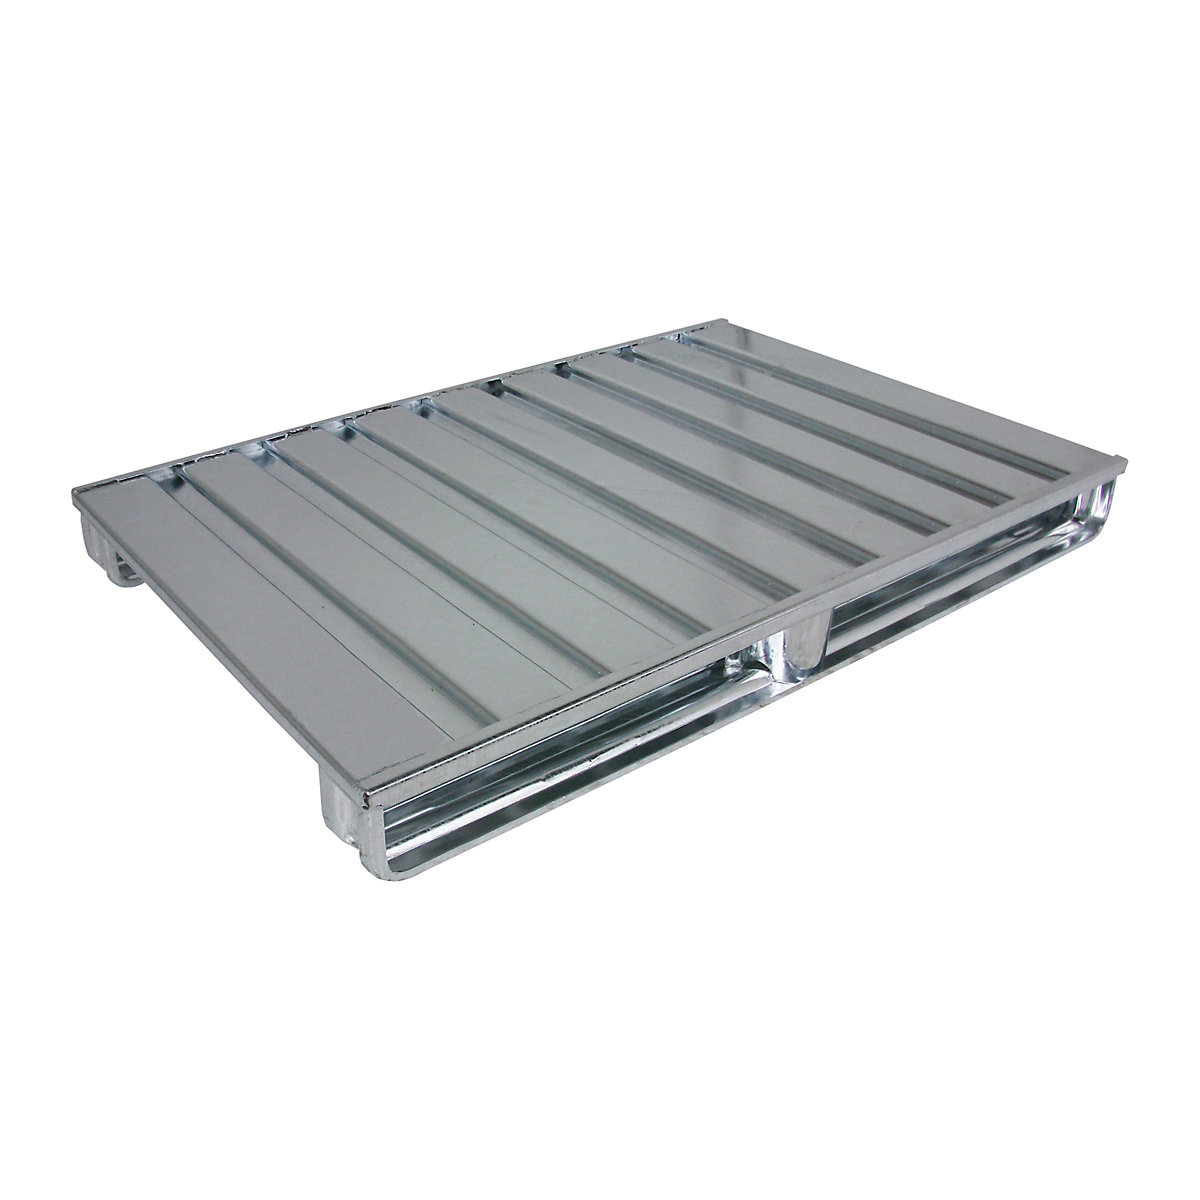 Flat steel pallet – Heson, LxW 1000 x 800 mm, max. load 2000 kg, zinc plated-3